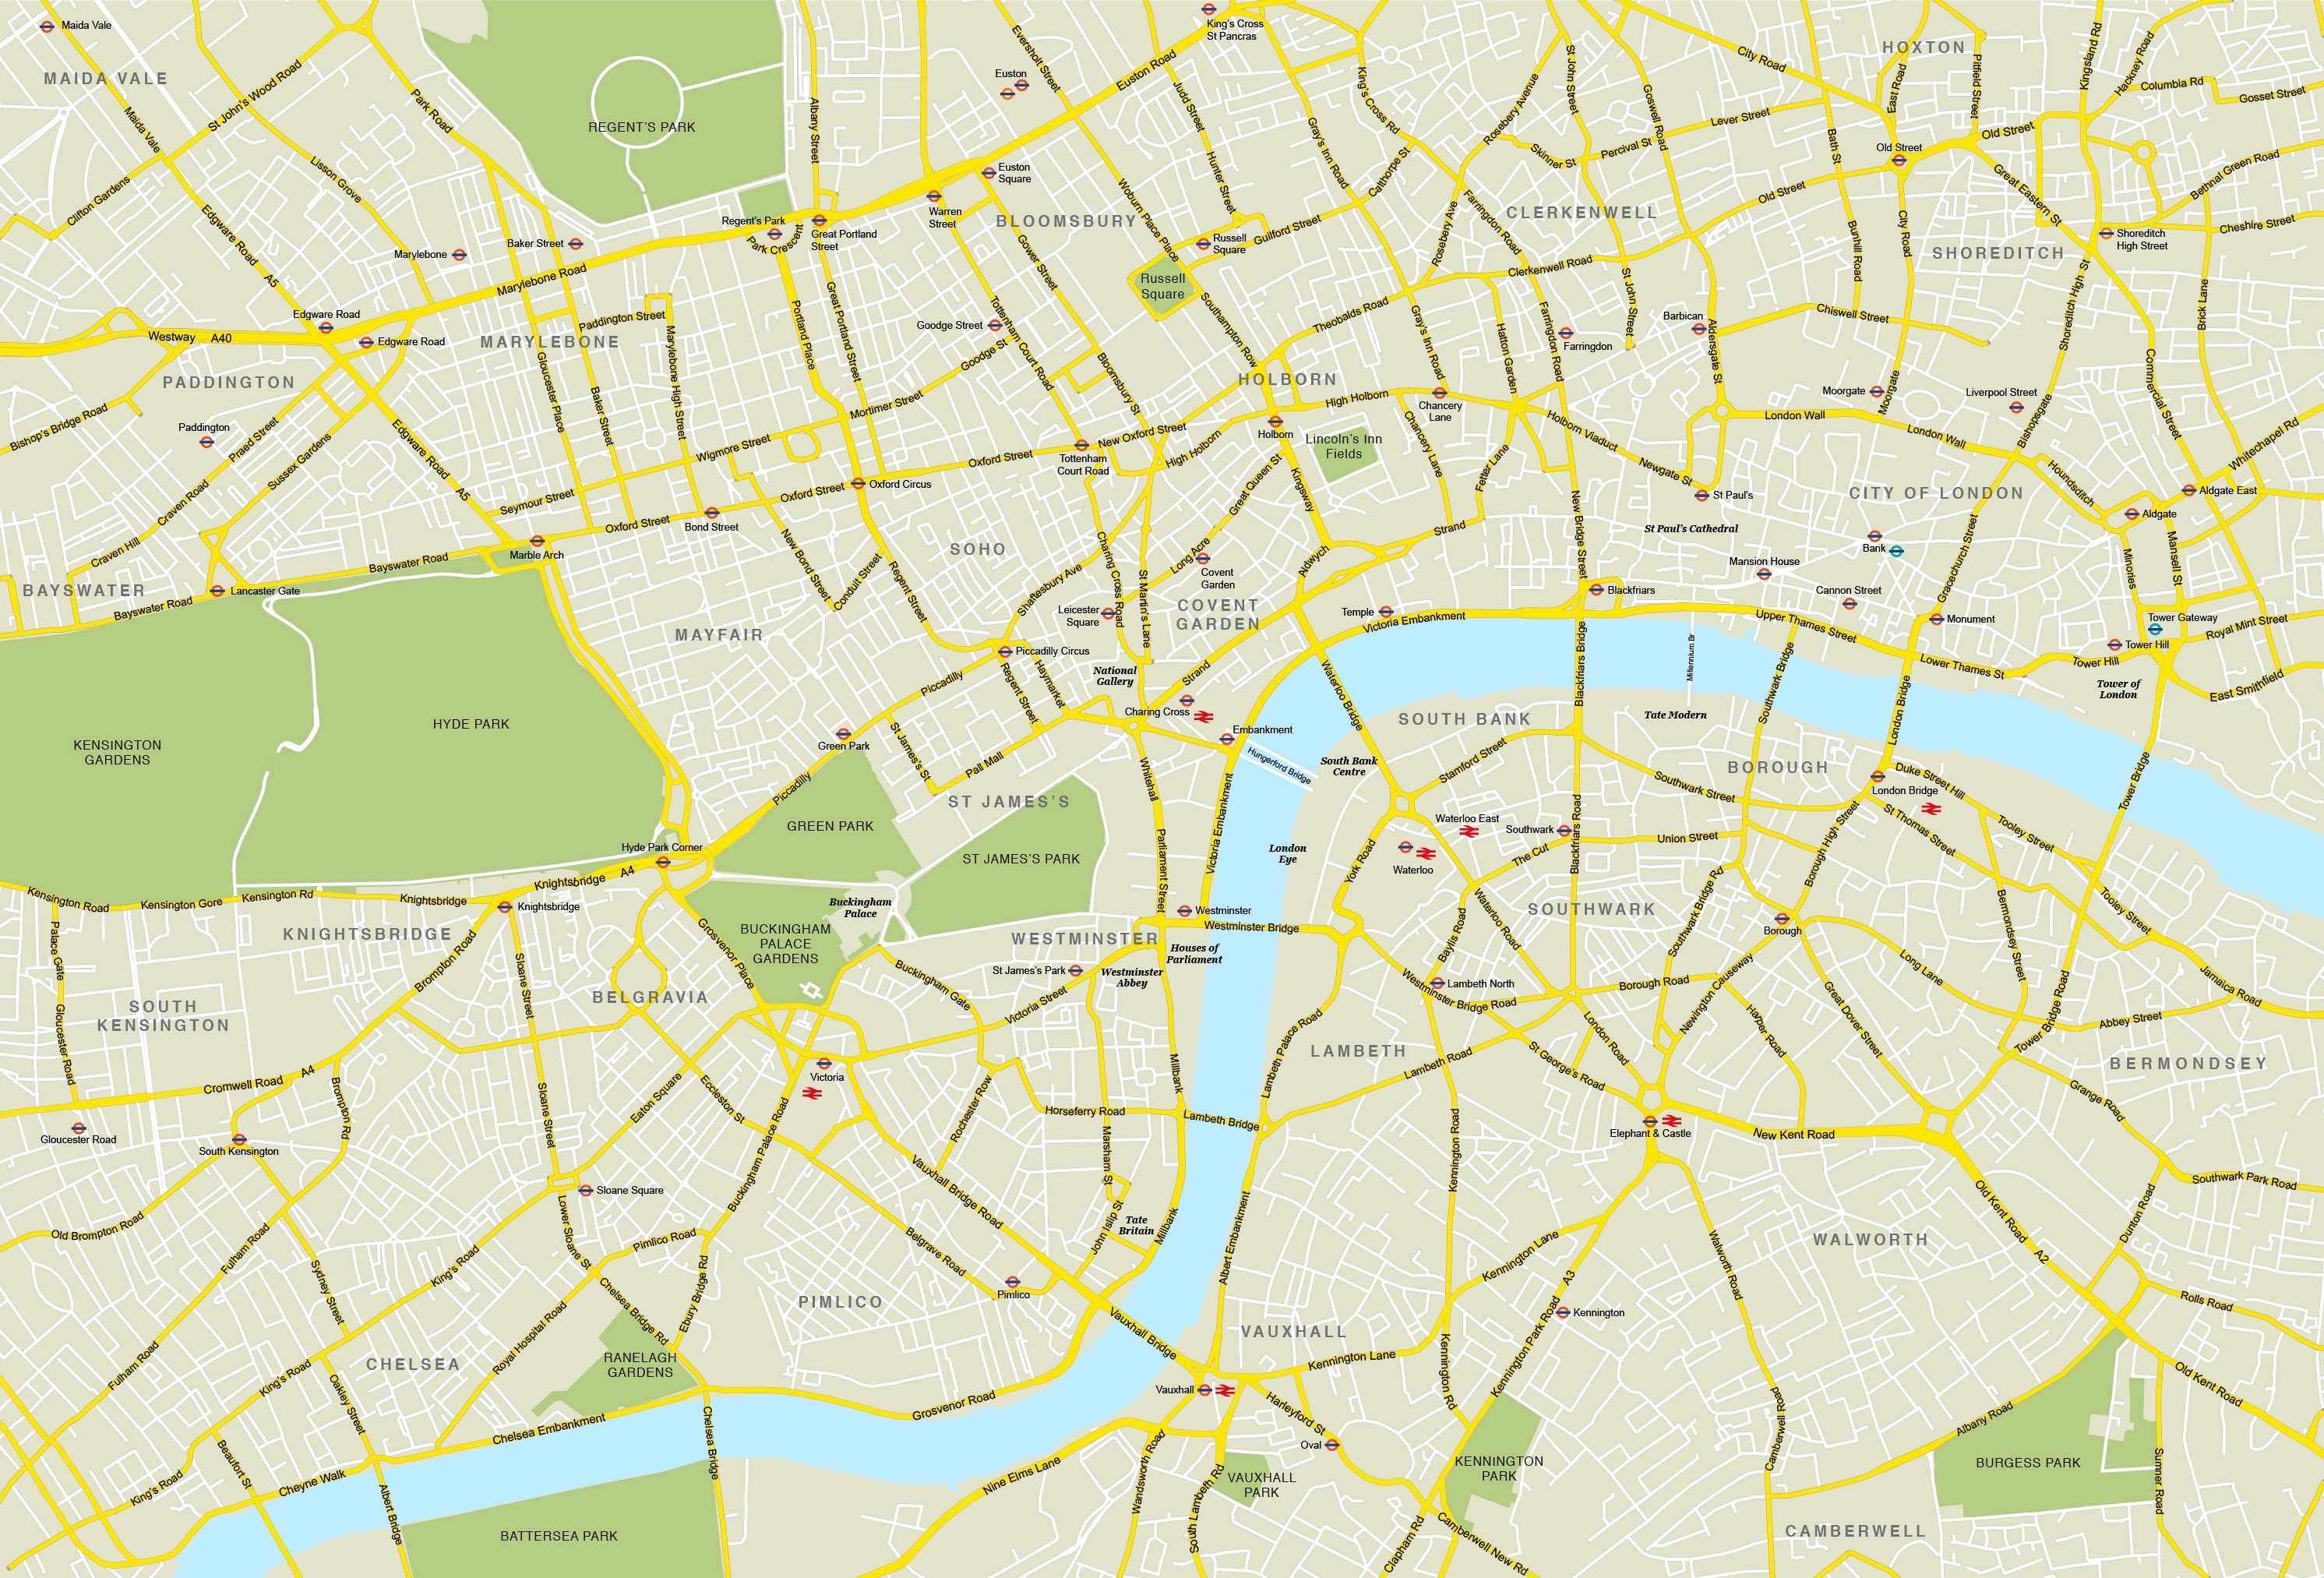 Printable Street Map Of Central London | Globalsupportinitiative - Printable Street Maps Free